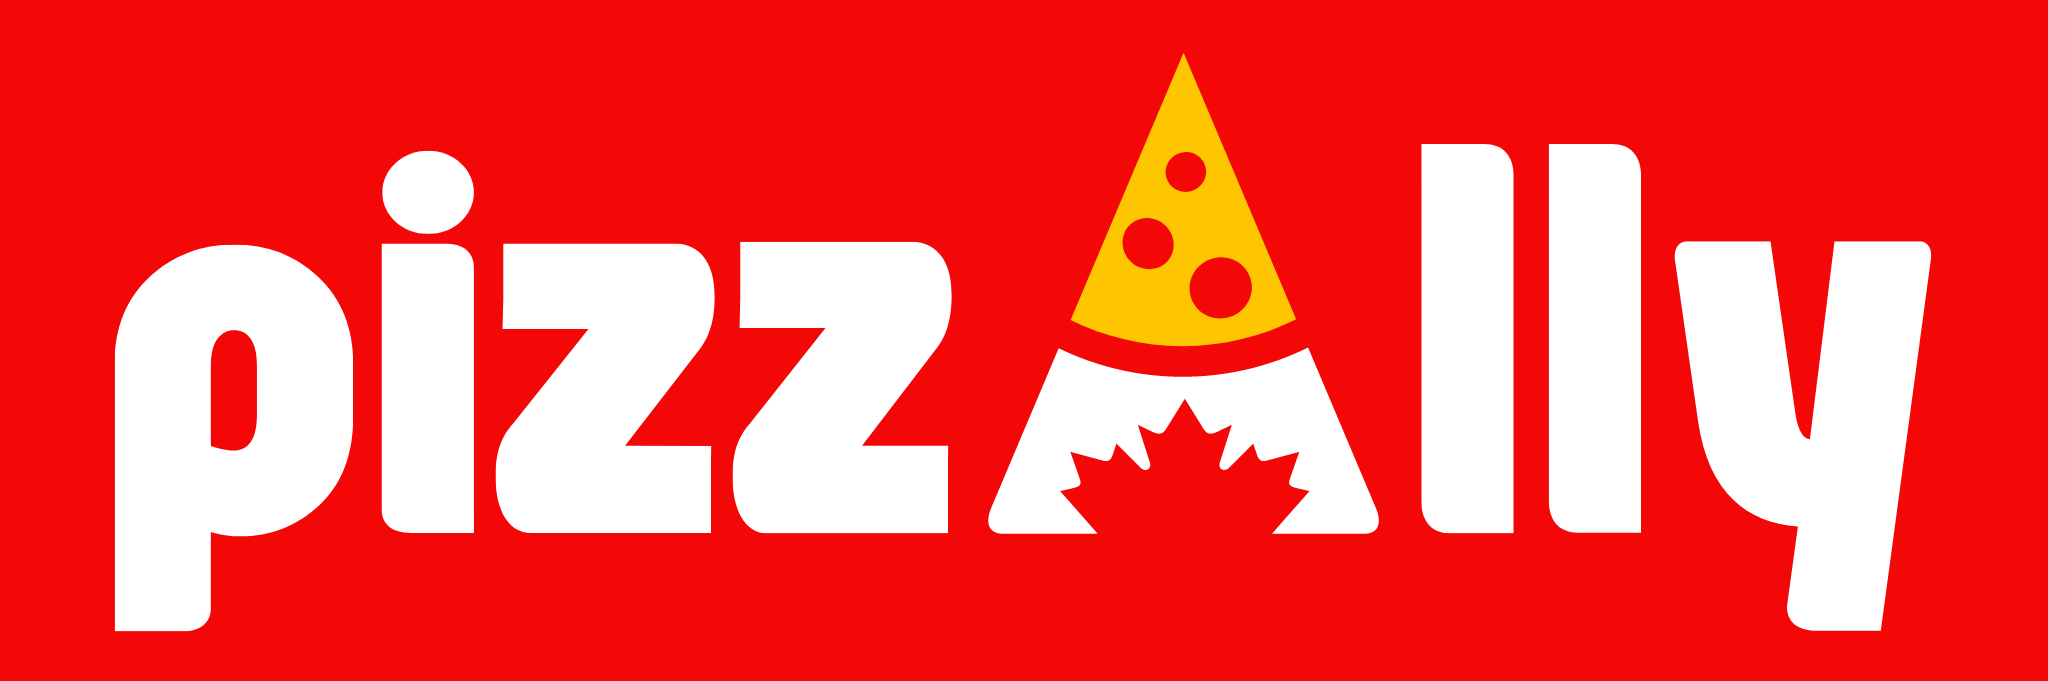 Pizzally - Best HMA Halal Pizza in Canada